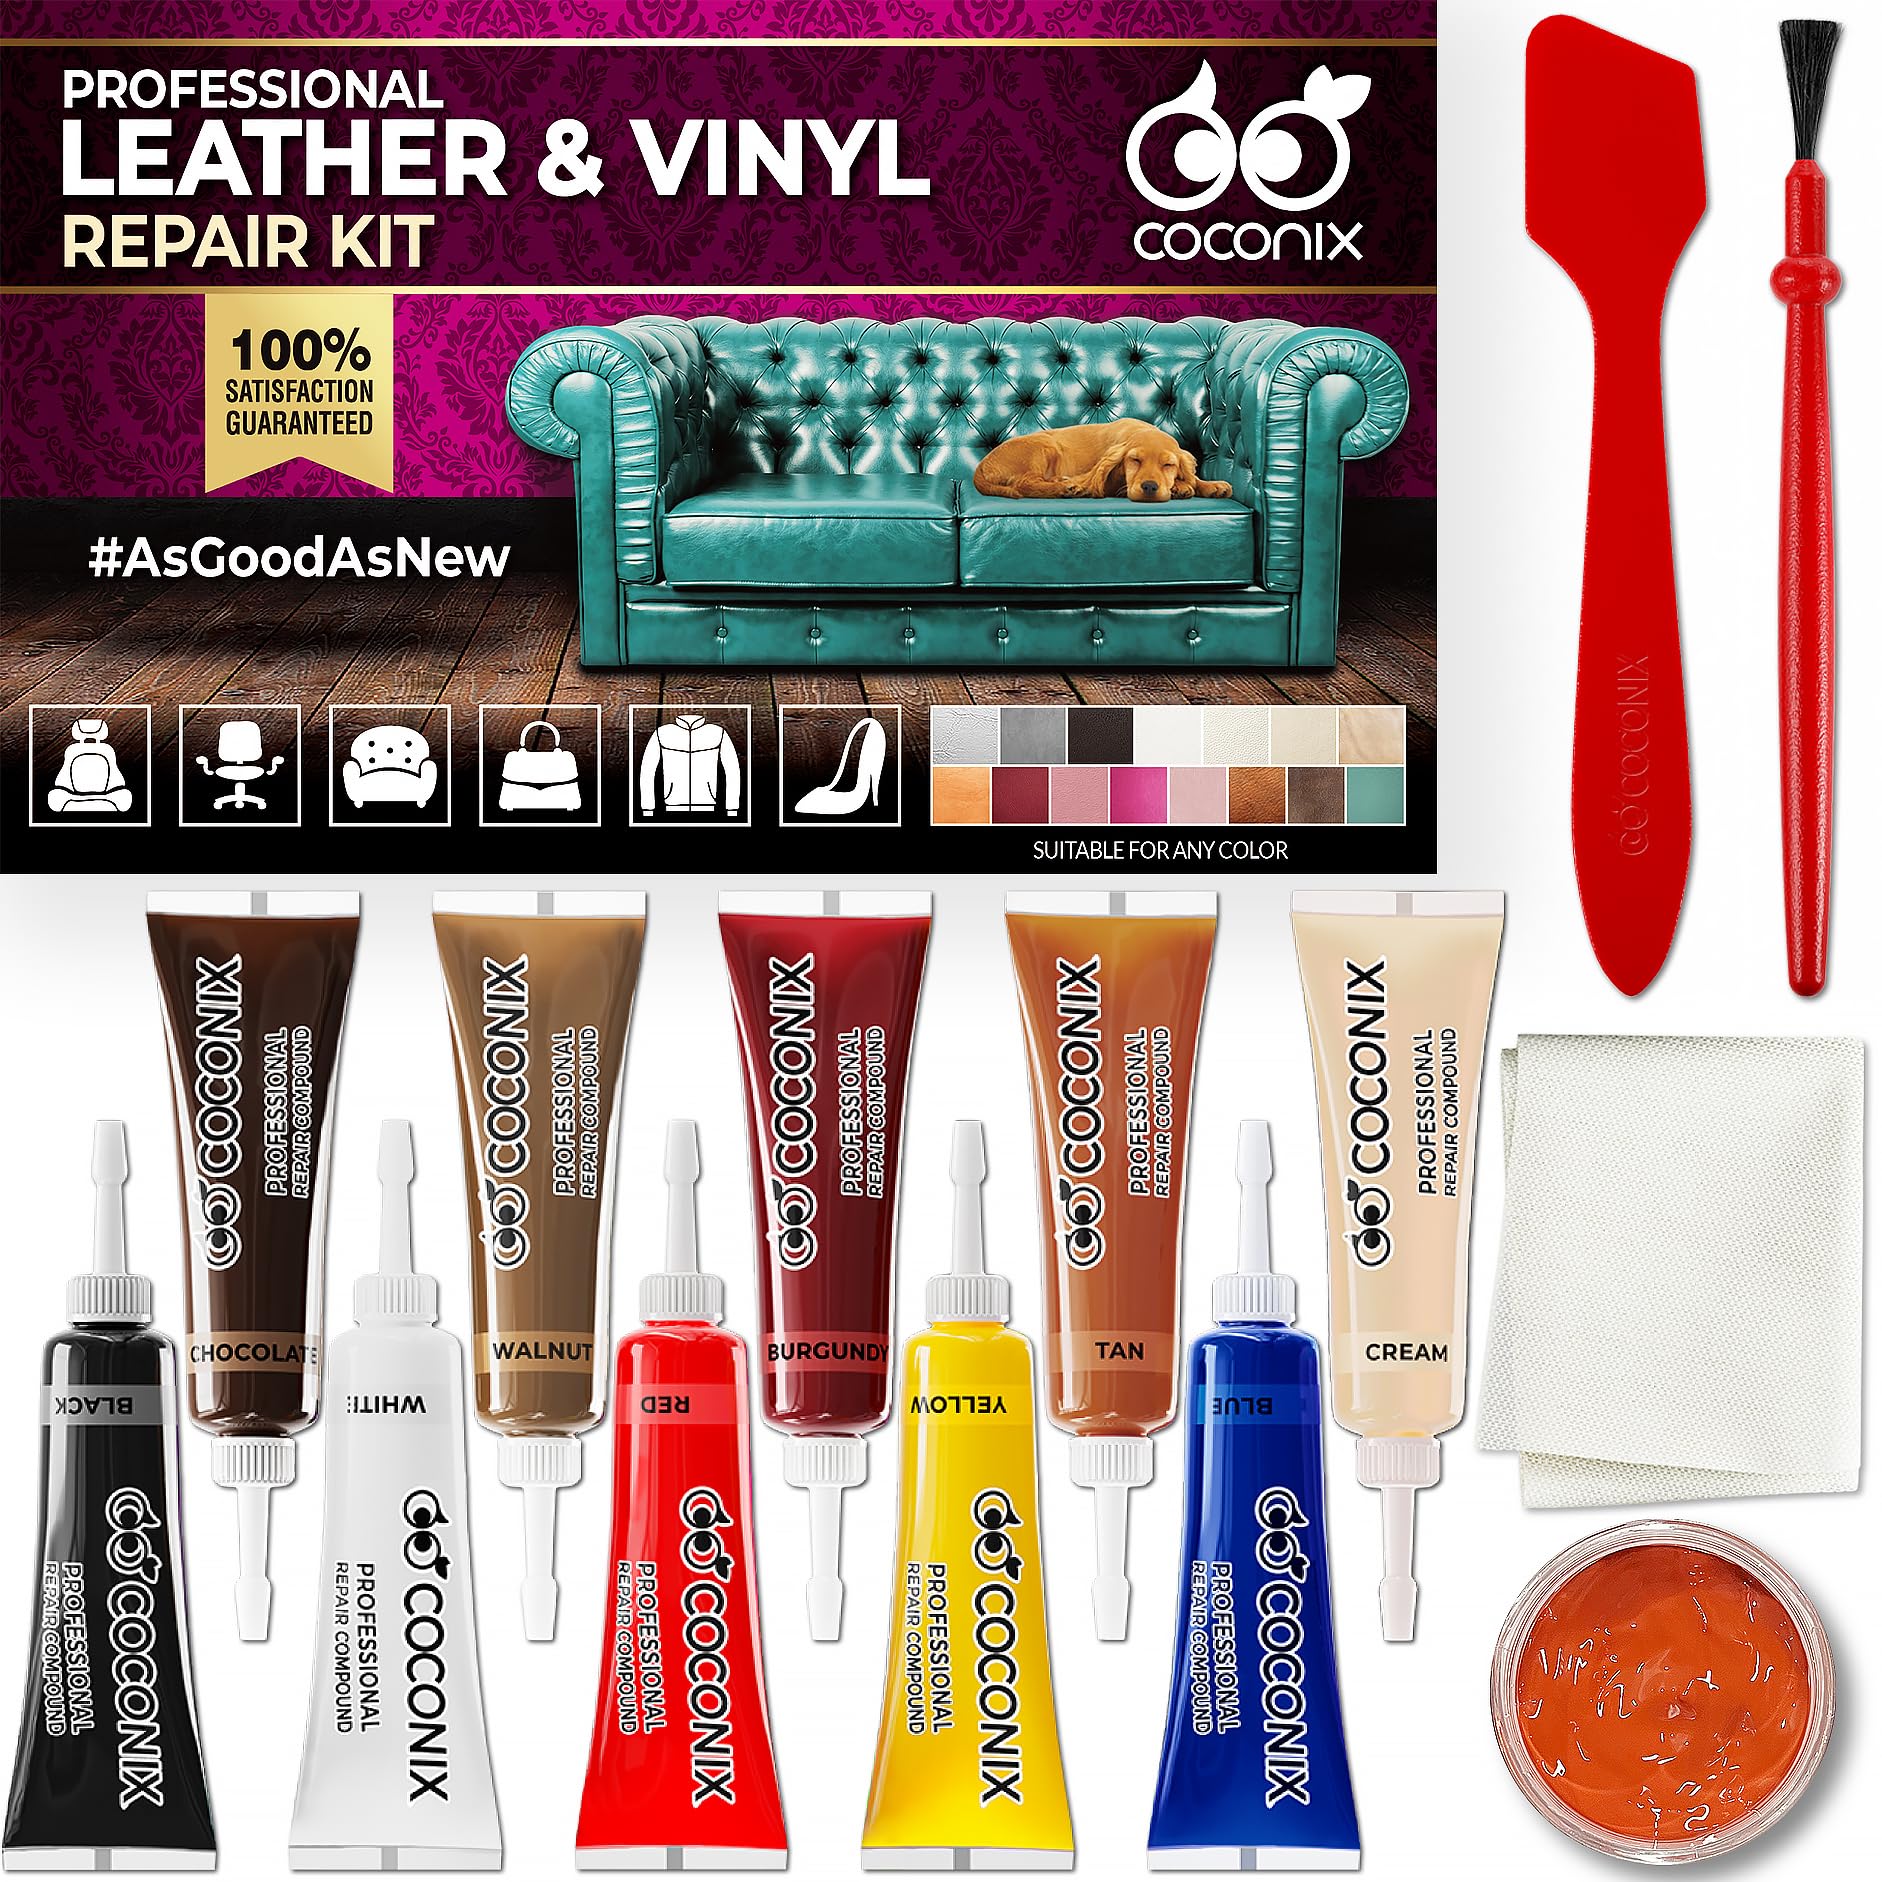 Coconix Vinyl and Leather Repair Kit - Restorer of Your Furniture, Jacket, Sofa, Boat or Car Seat, Super Easy Instructions to Match Any Color, Restore Any Material, Bonded, Italian, Pleather, Genuine